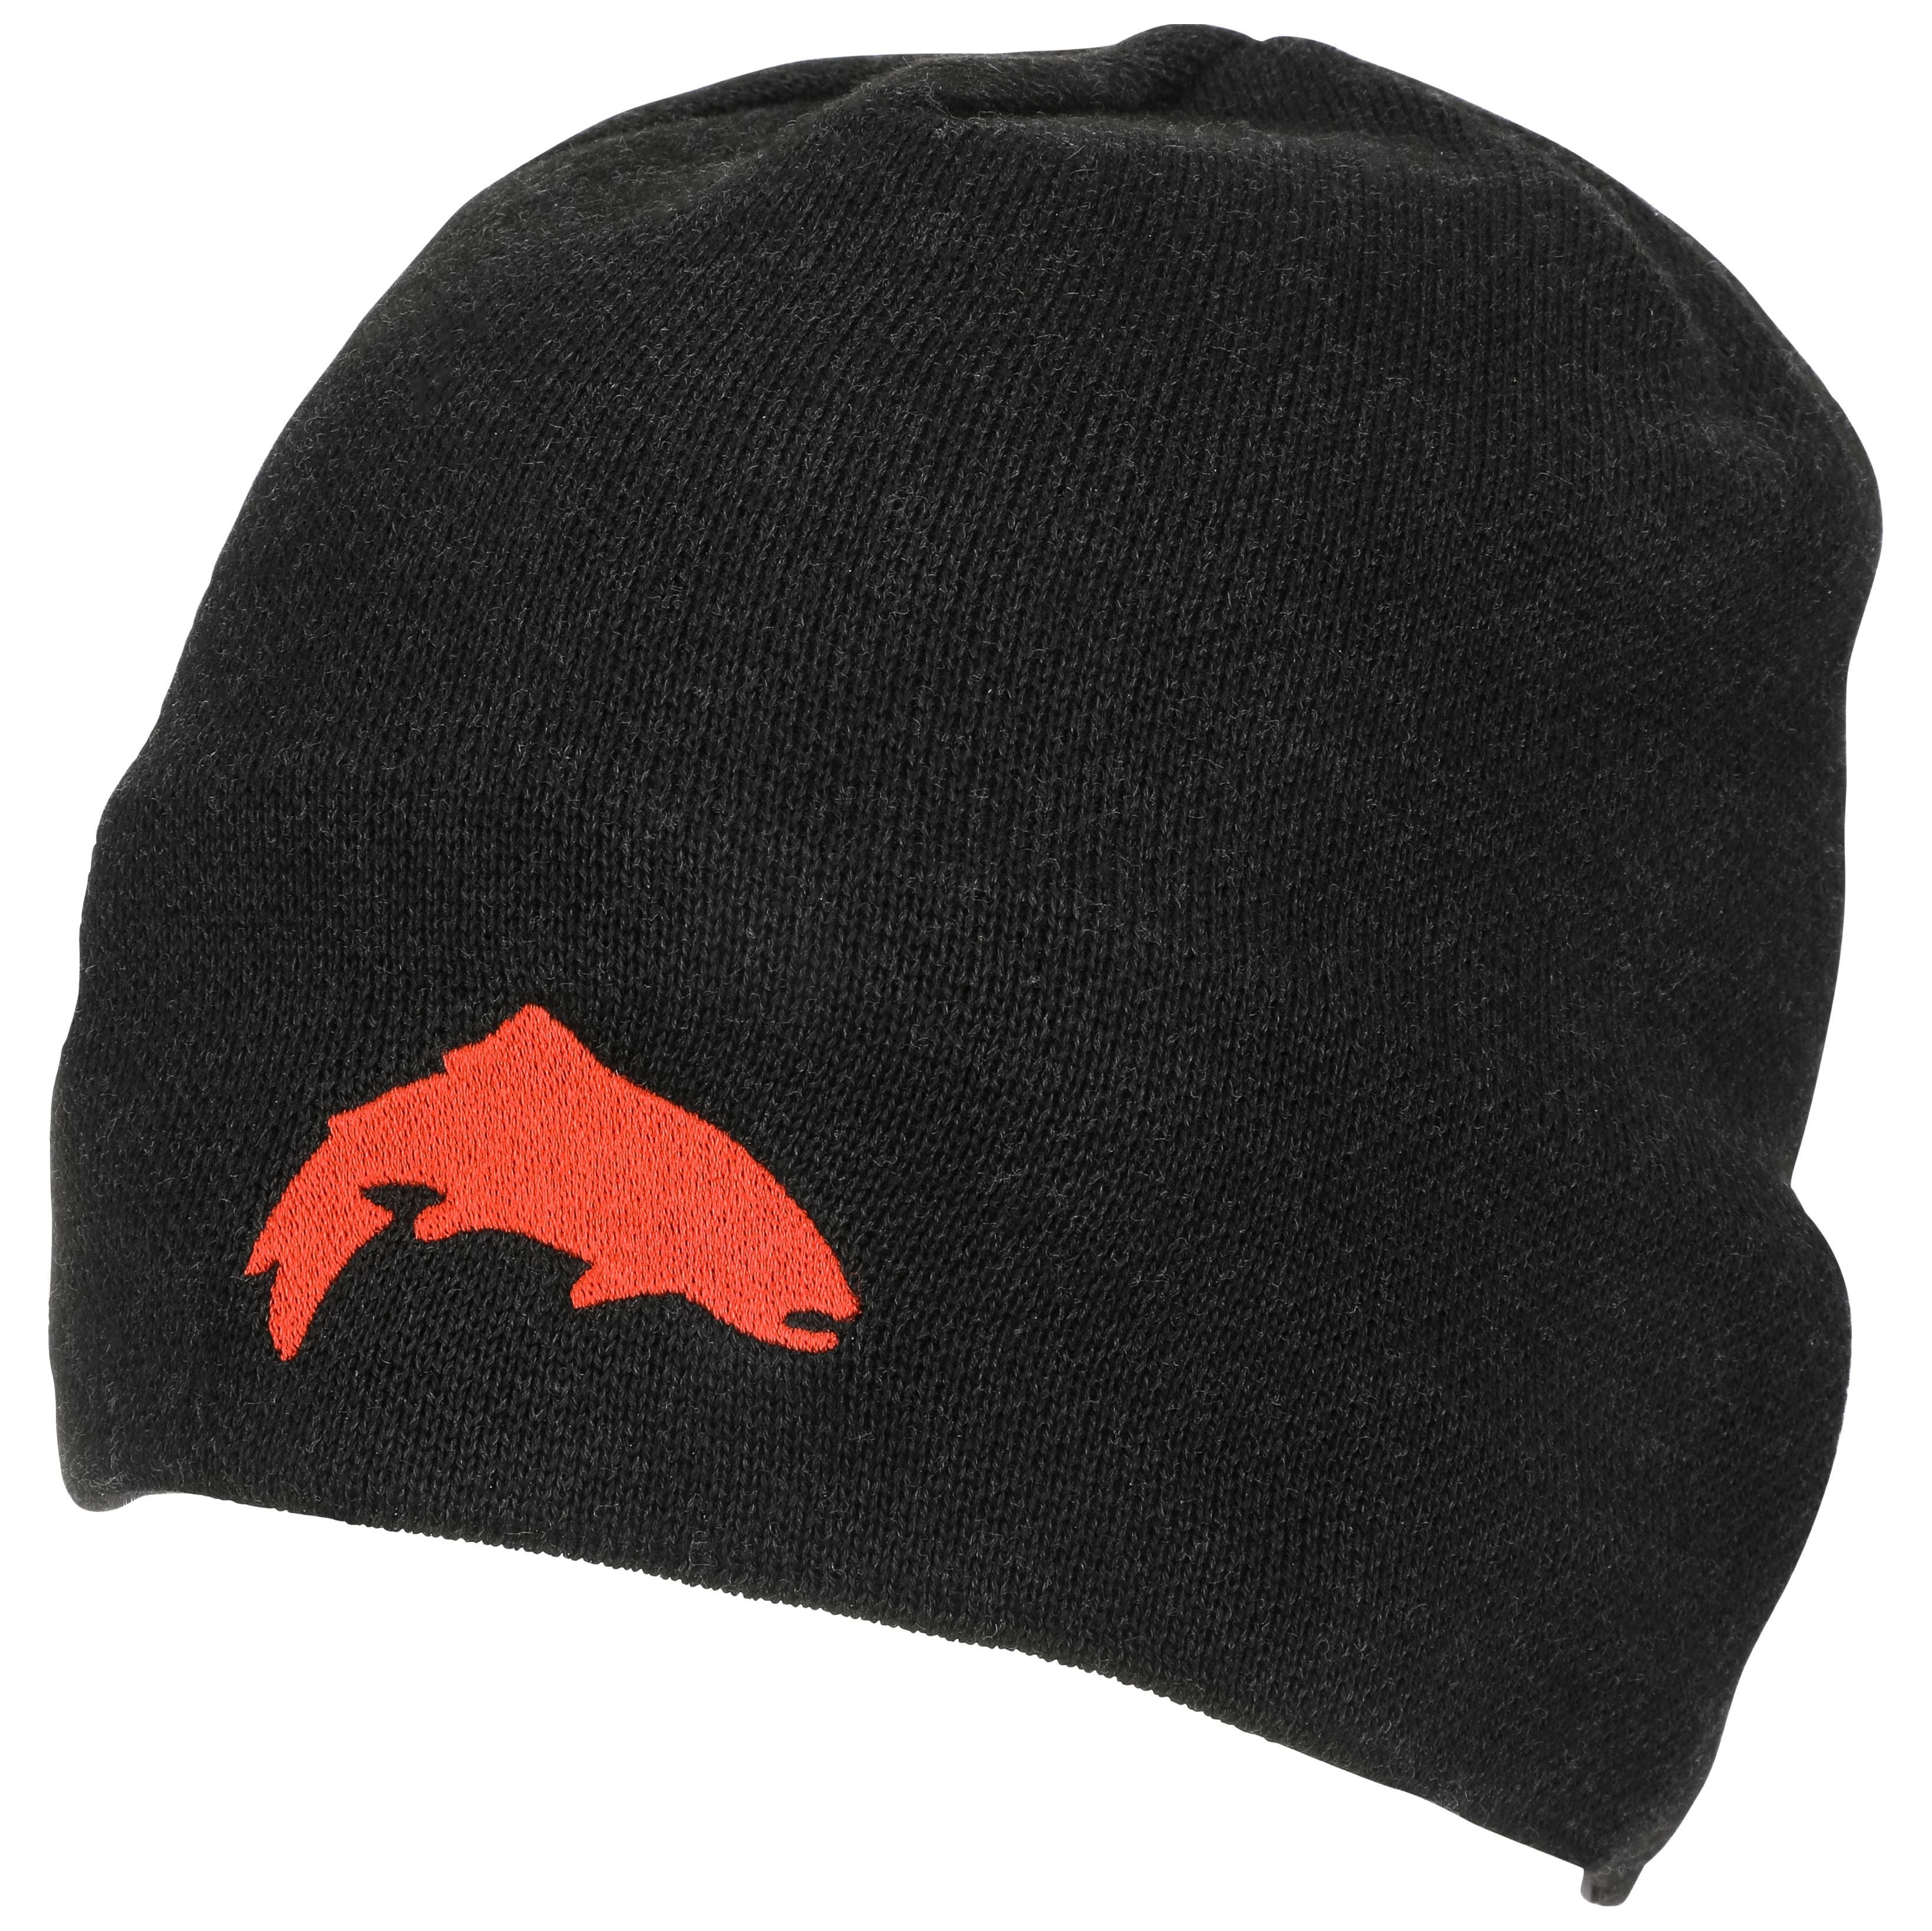 Simms Everyday Beanie Carbon Image 01